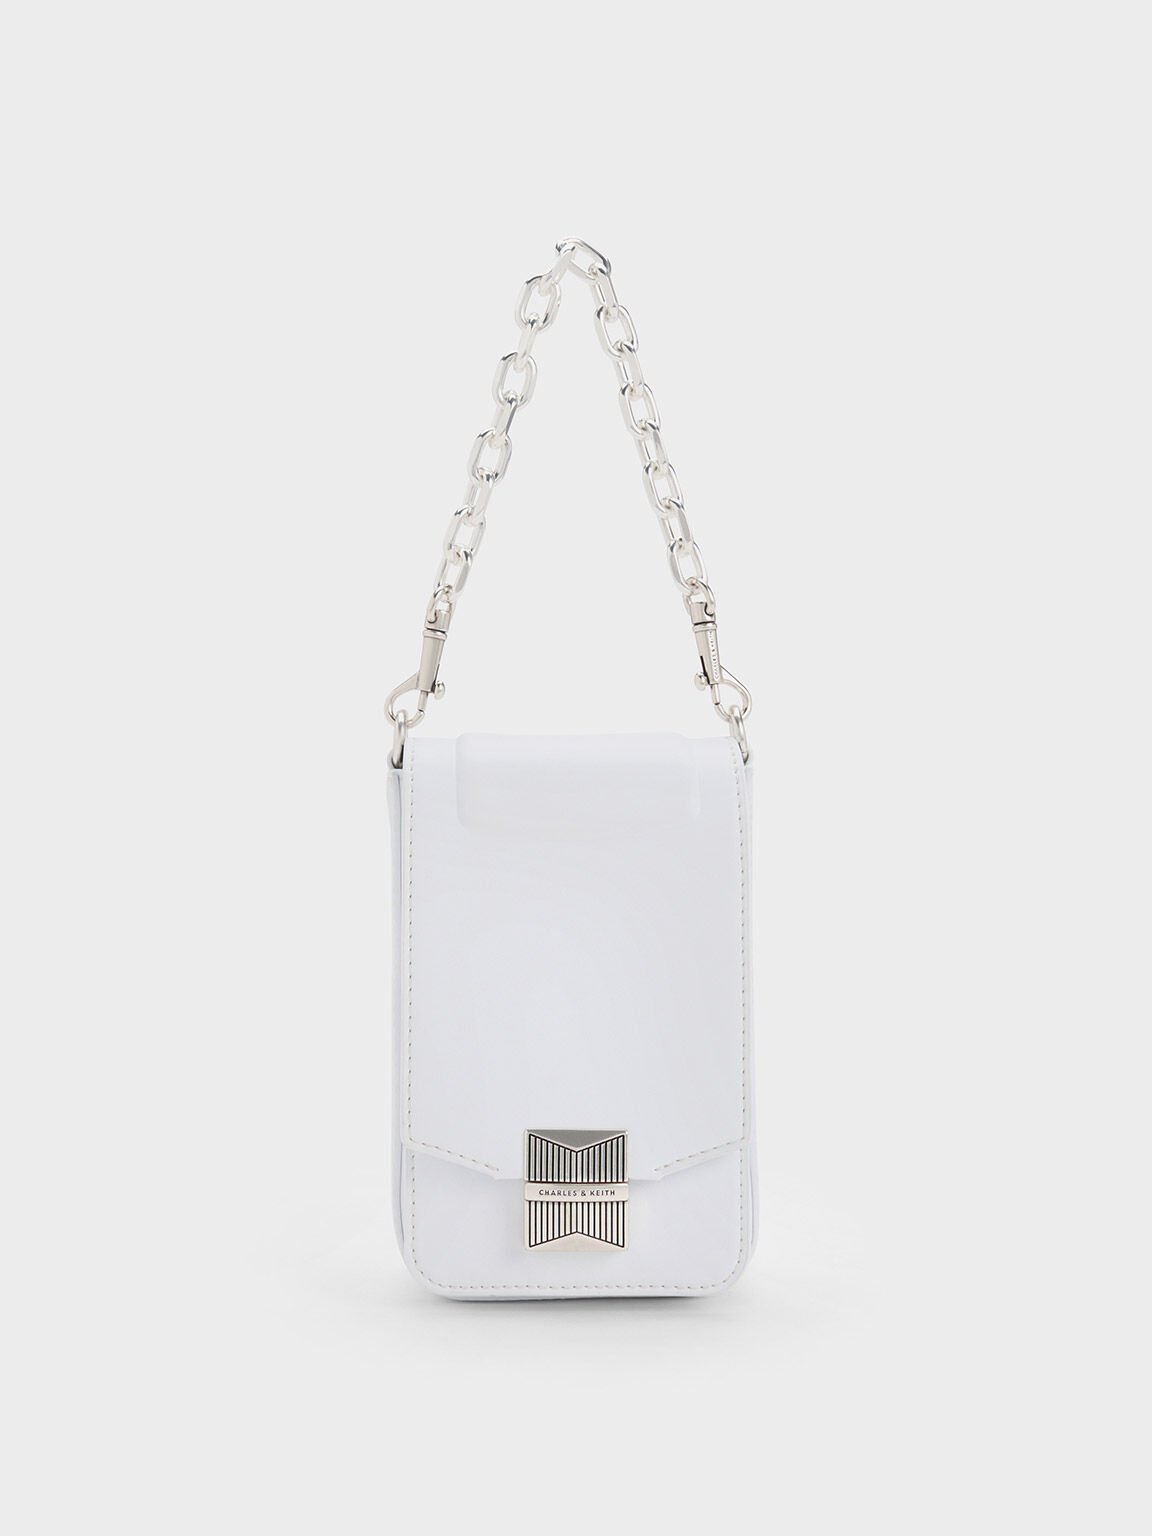 Phone Bag Phone Purse Cross Body Bag Waist Phone Pouch Fit 6.5 Inch Phones  : Amazon.in: Bags, Wallets and Luggage